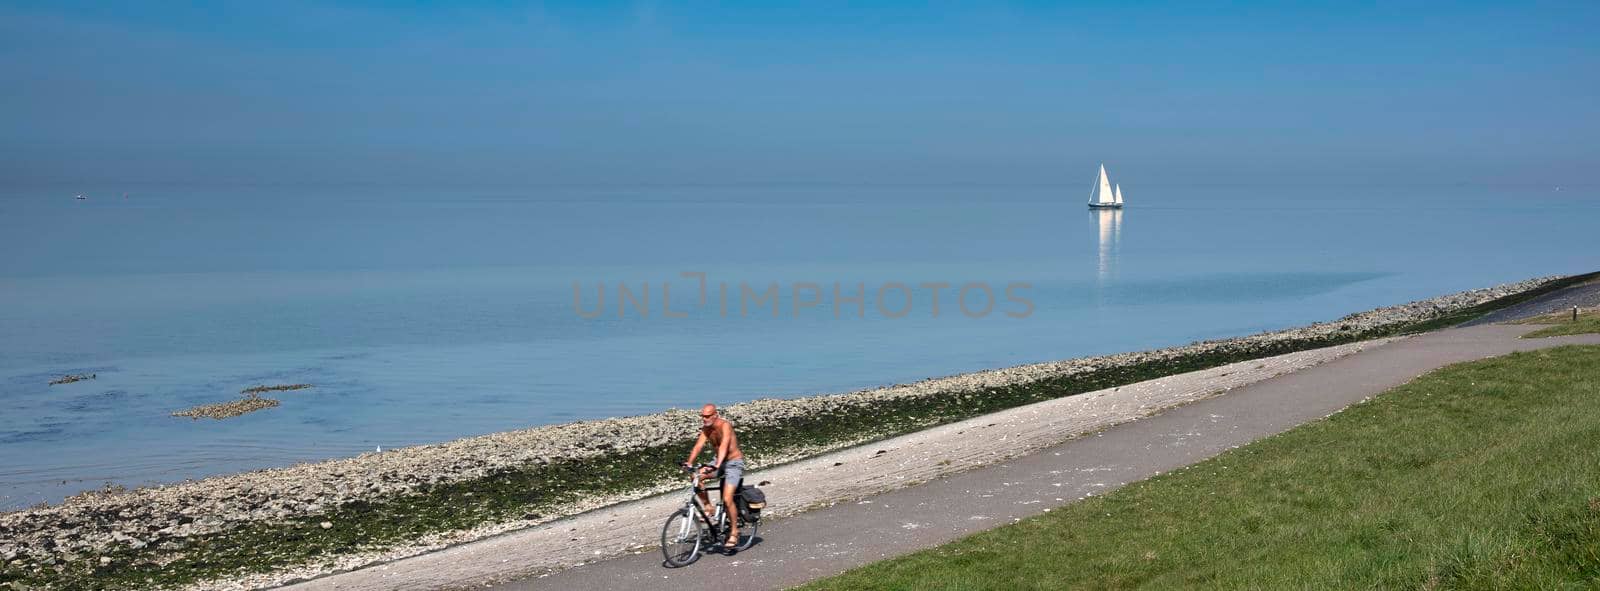 man on bicycle track and lonely sailing boat on vast empty blue lake in zeeland by ahavelaar